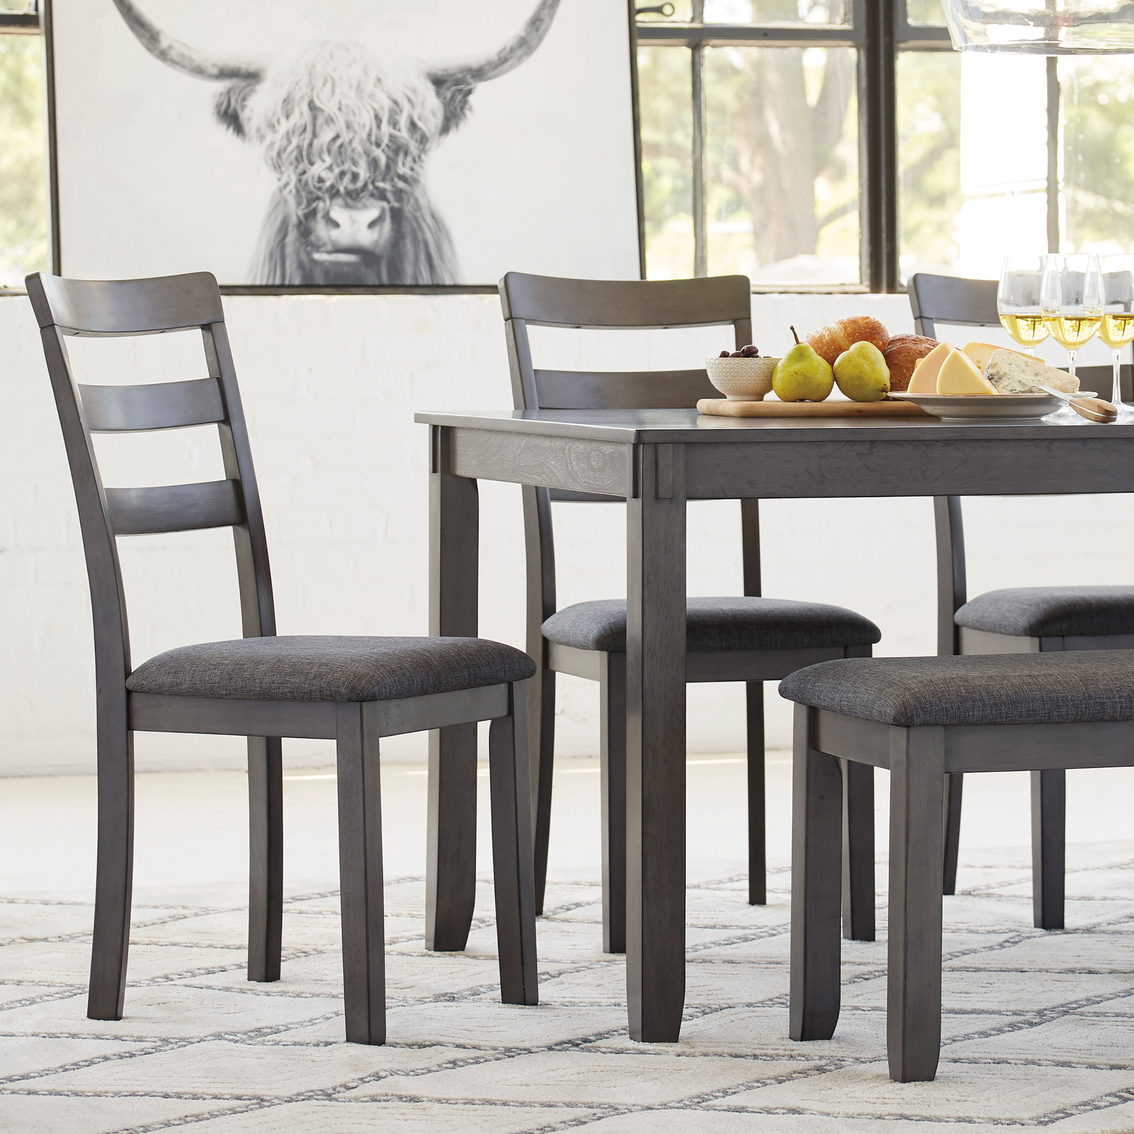 Signature Design by Ashley Bridson 6 pc. Rectangular Dining Set with Bench - Image 4 of 7